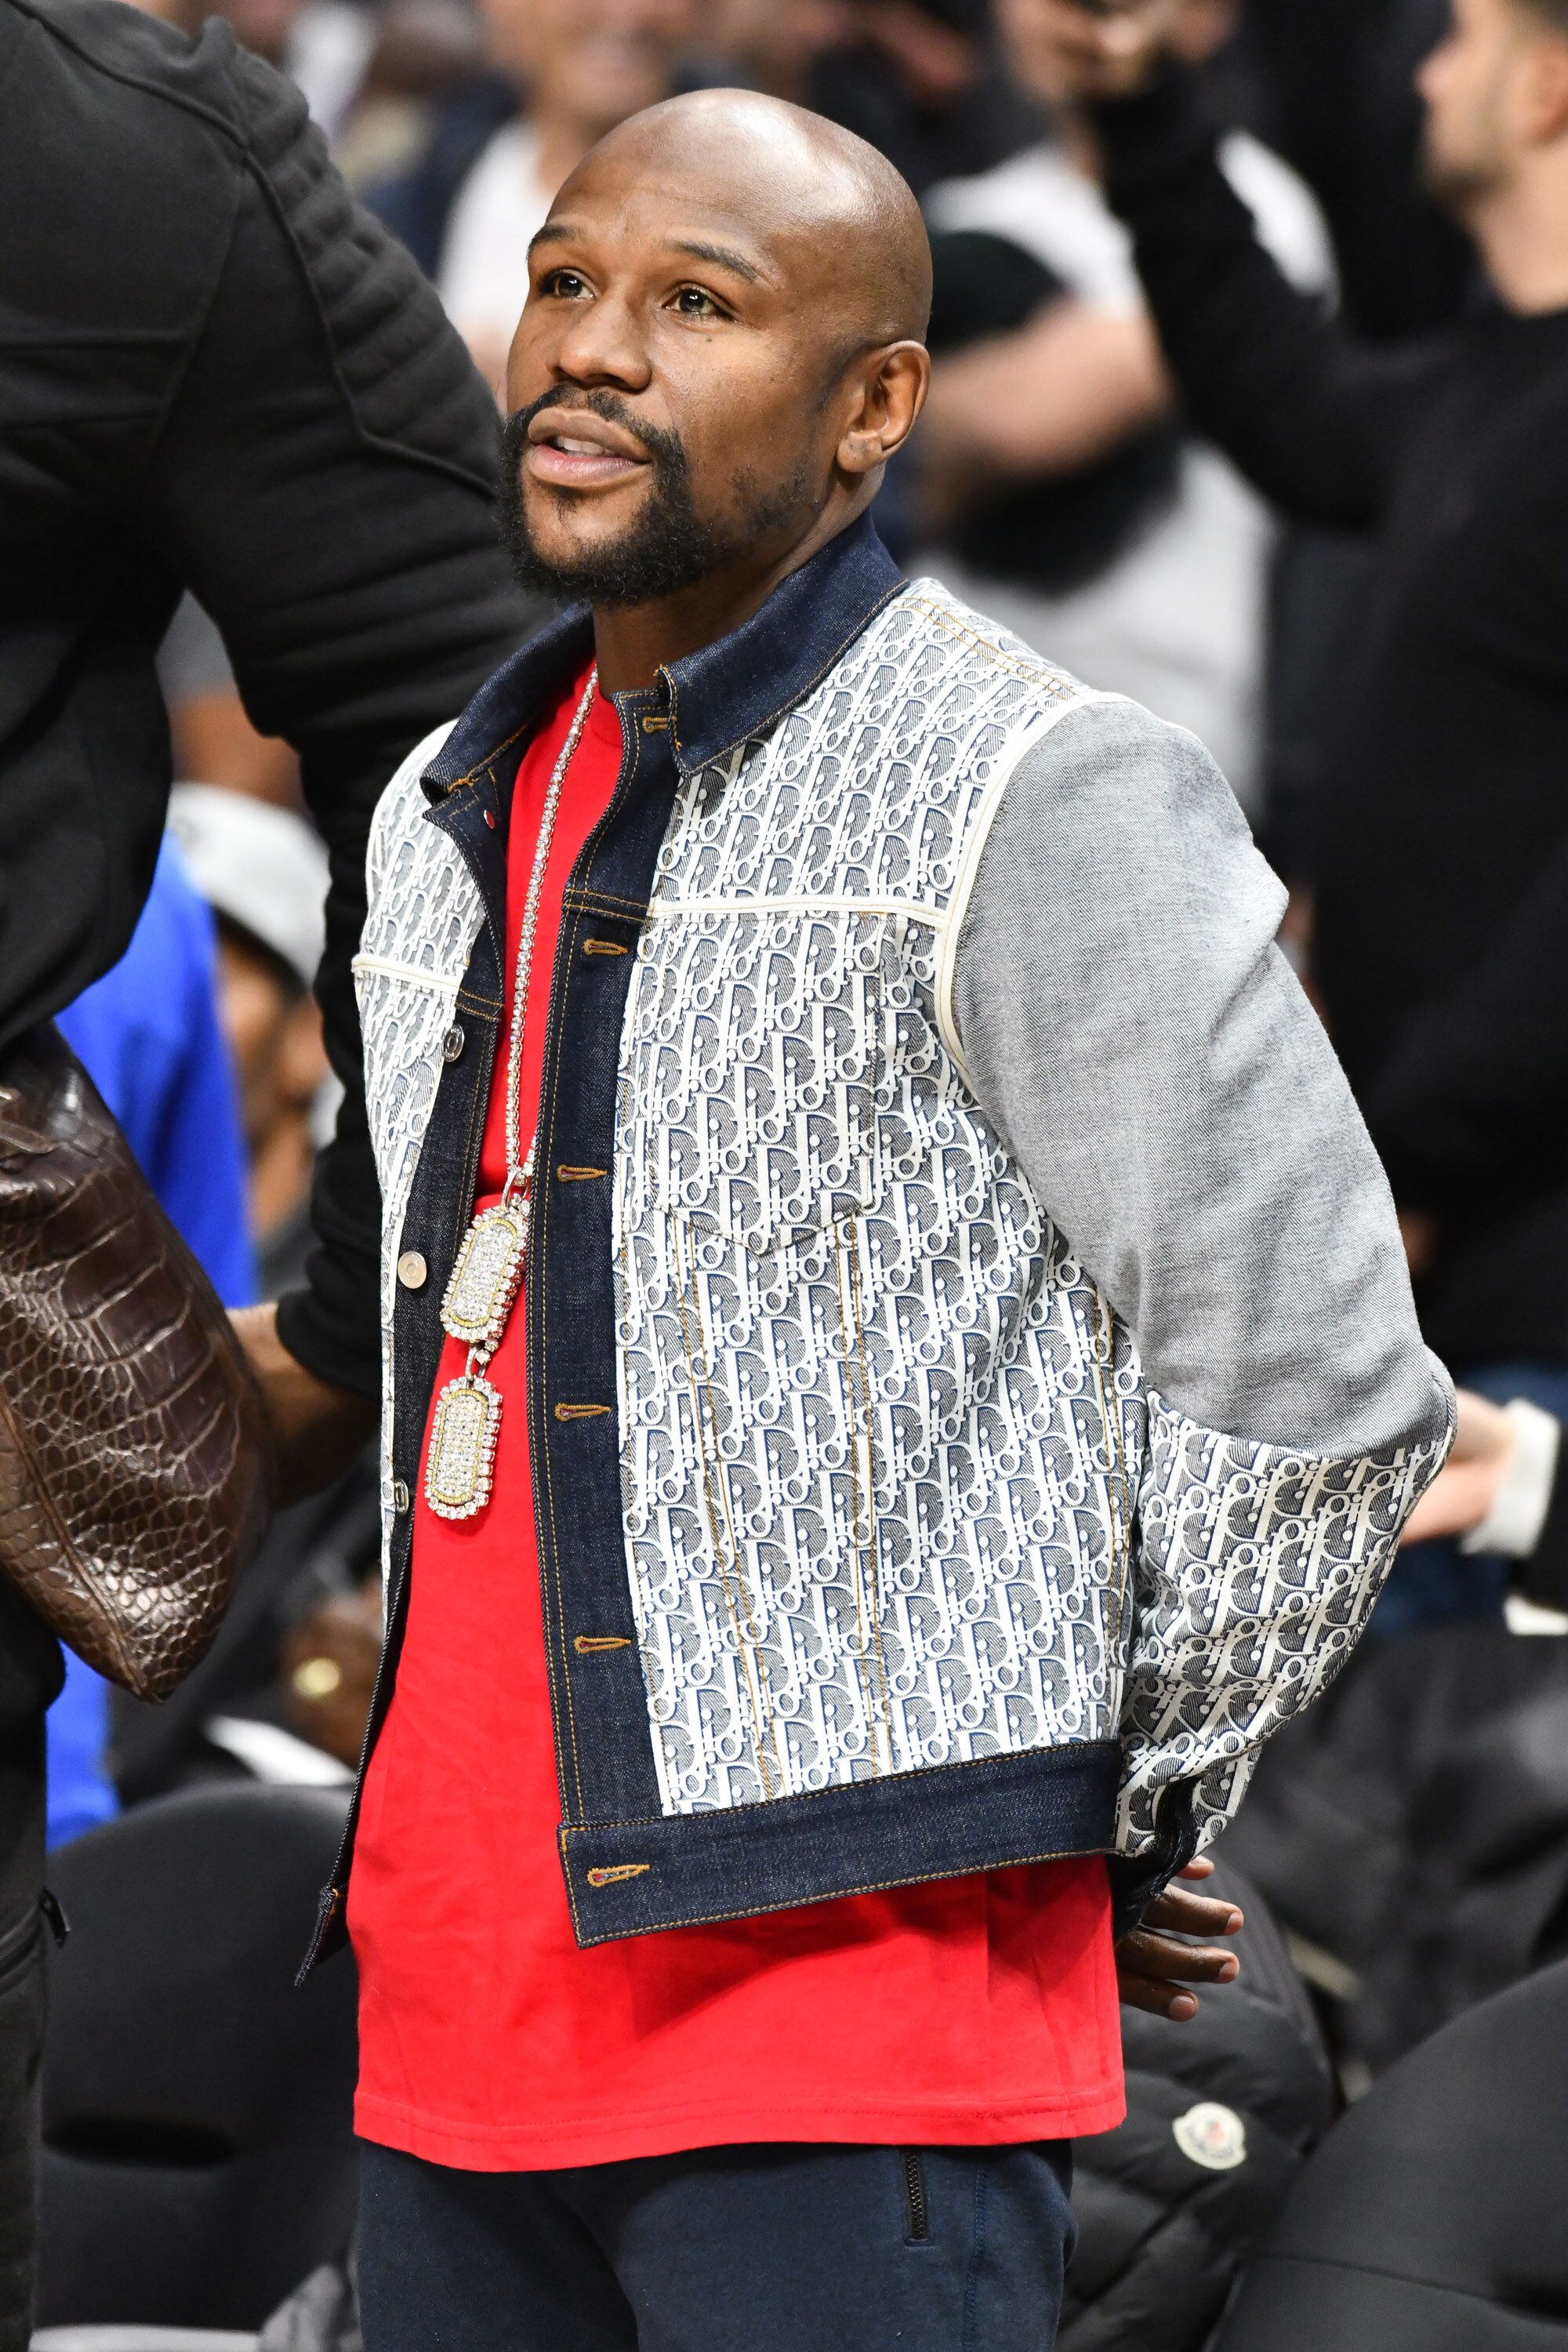 Floyd Mayweather Jr. attends a basketball game between the Los Angeles Clippers and the Boston Celtics at Staples Center on November 20, 2019 in Los Angeles, California. | Source: Getty Images